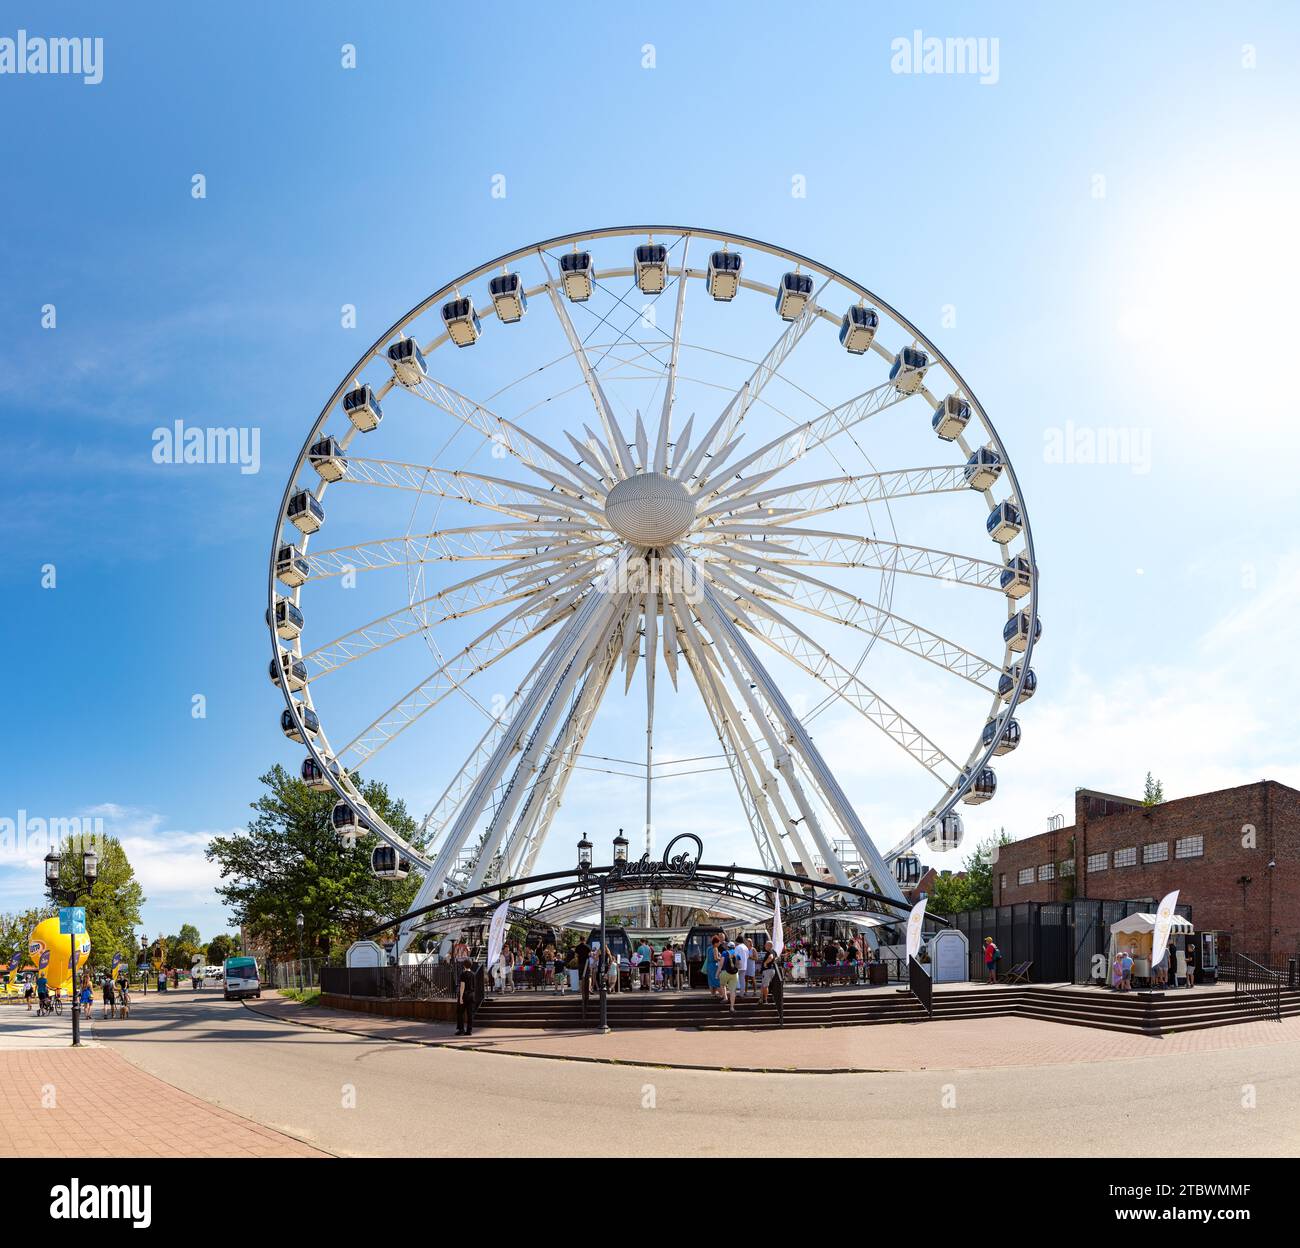 A picture of the AmberSky Ferris Wheel in Gdansk Stock Photo